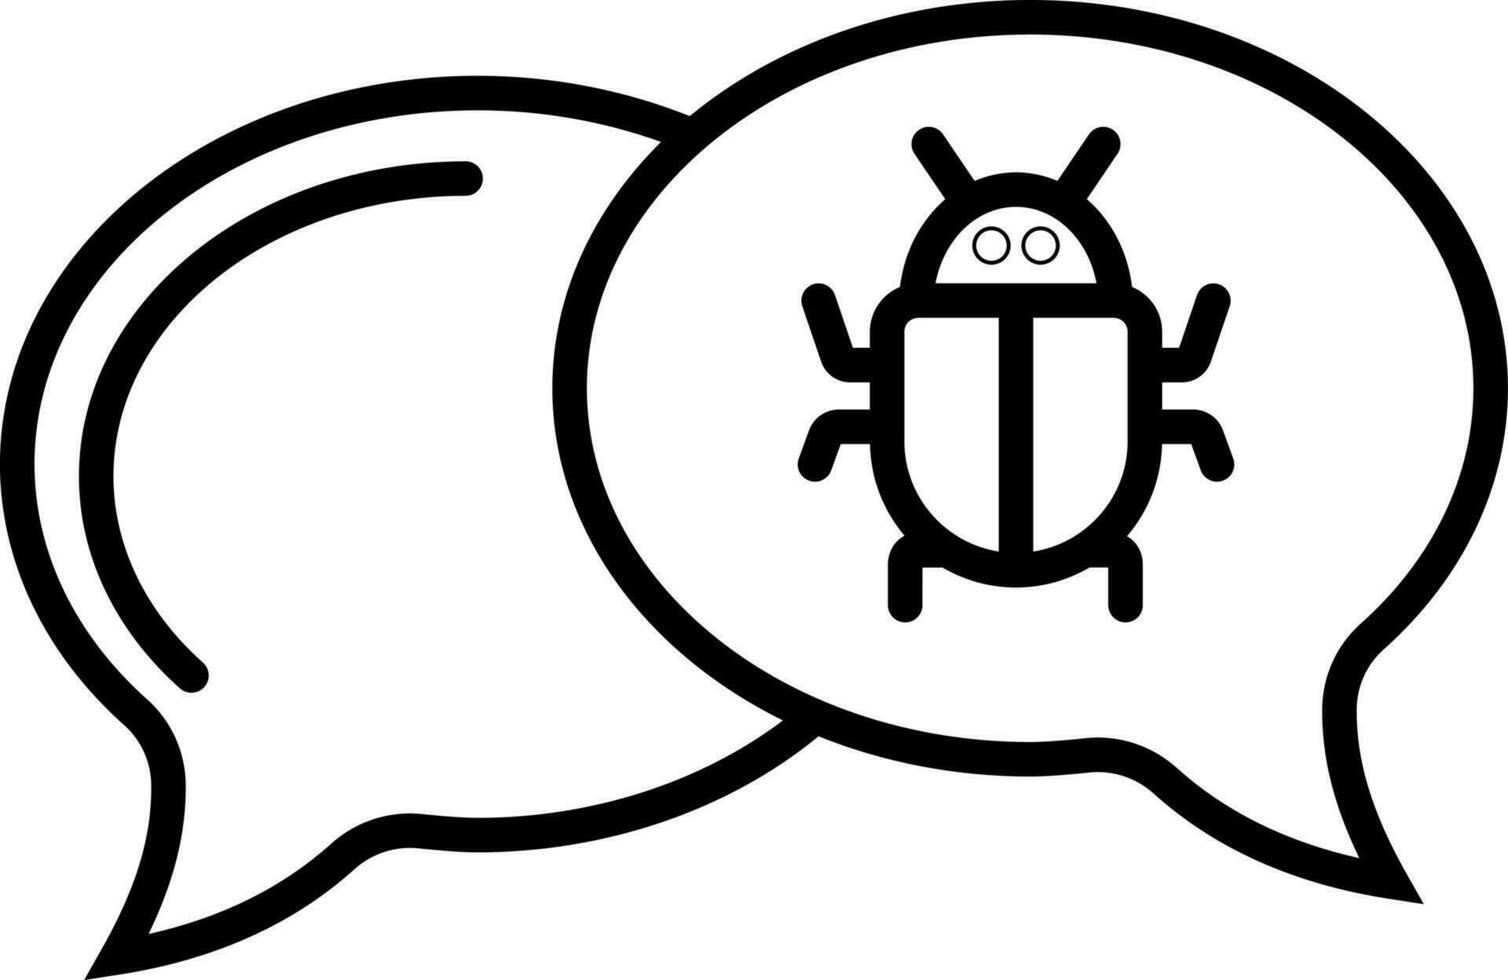 Bed bug symbol on chatting bubble in black line art. vector